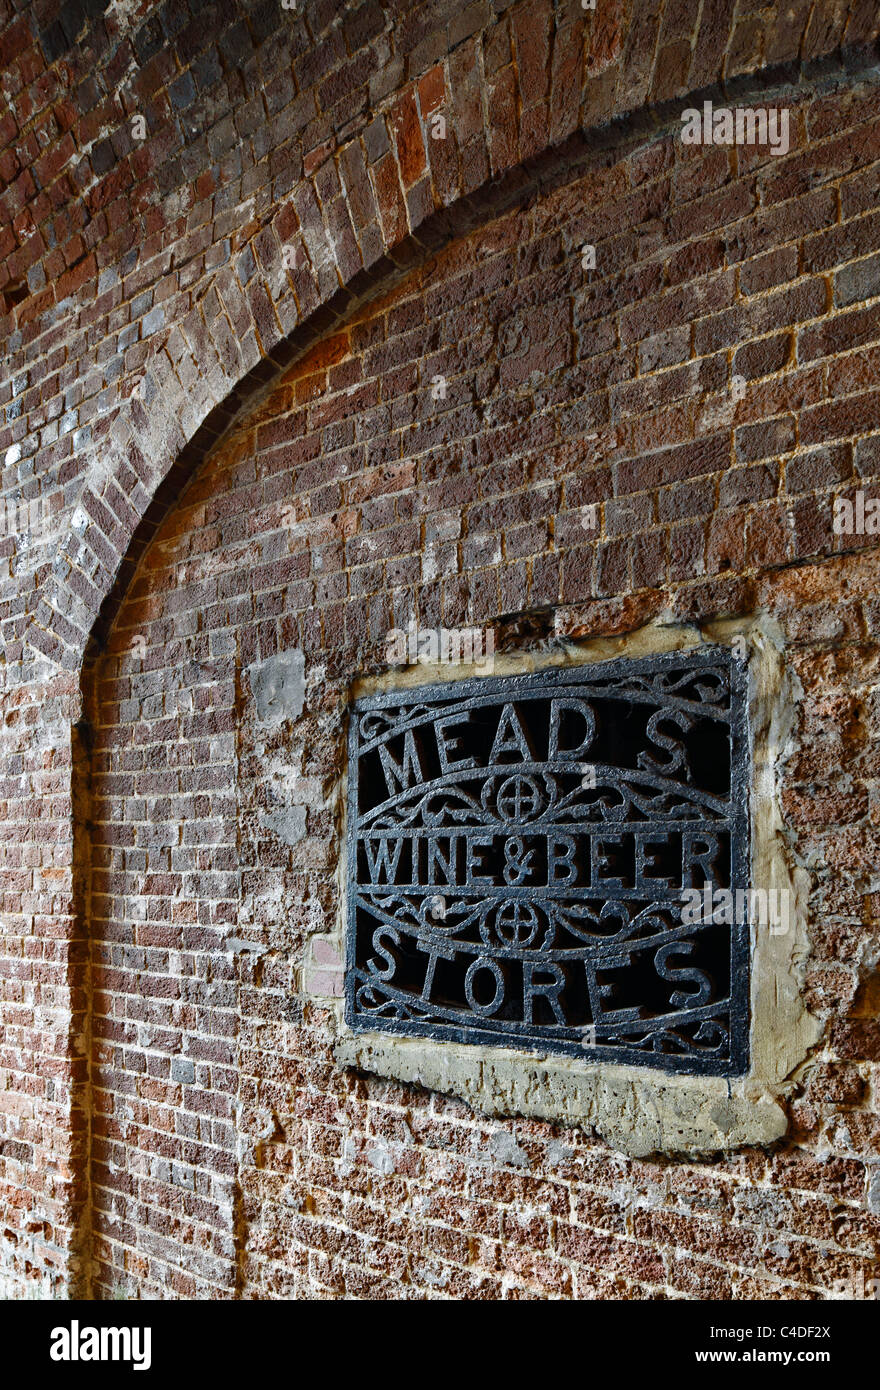 Old fashioned iron grate advertising Meads Stores. Stock Photo